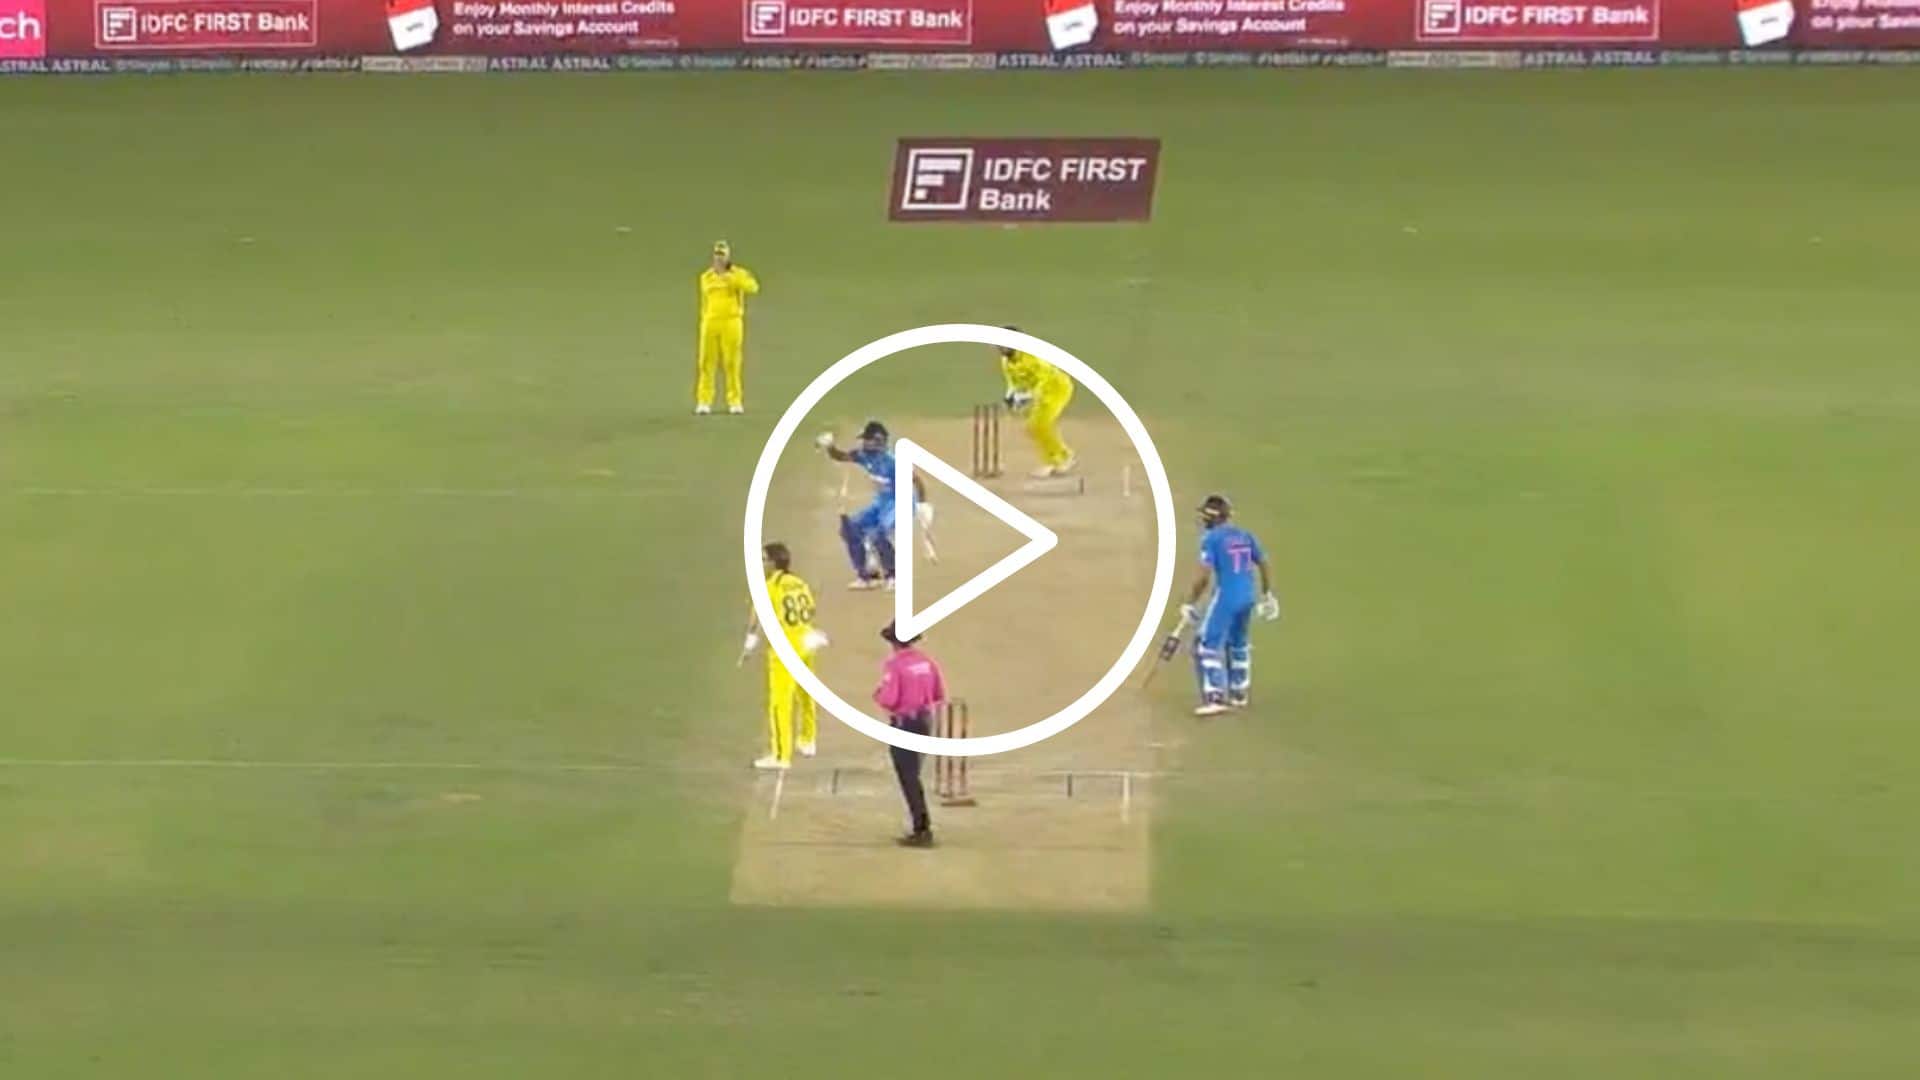 [Watch] Shreyas Iyer’s Confusion With Shubman Gill Leads To Brainfade Run-Out